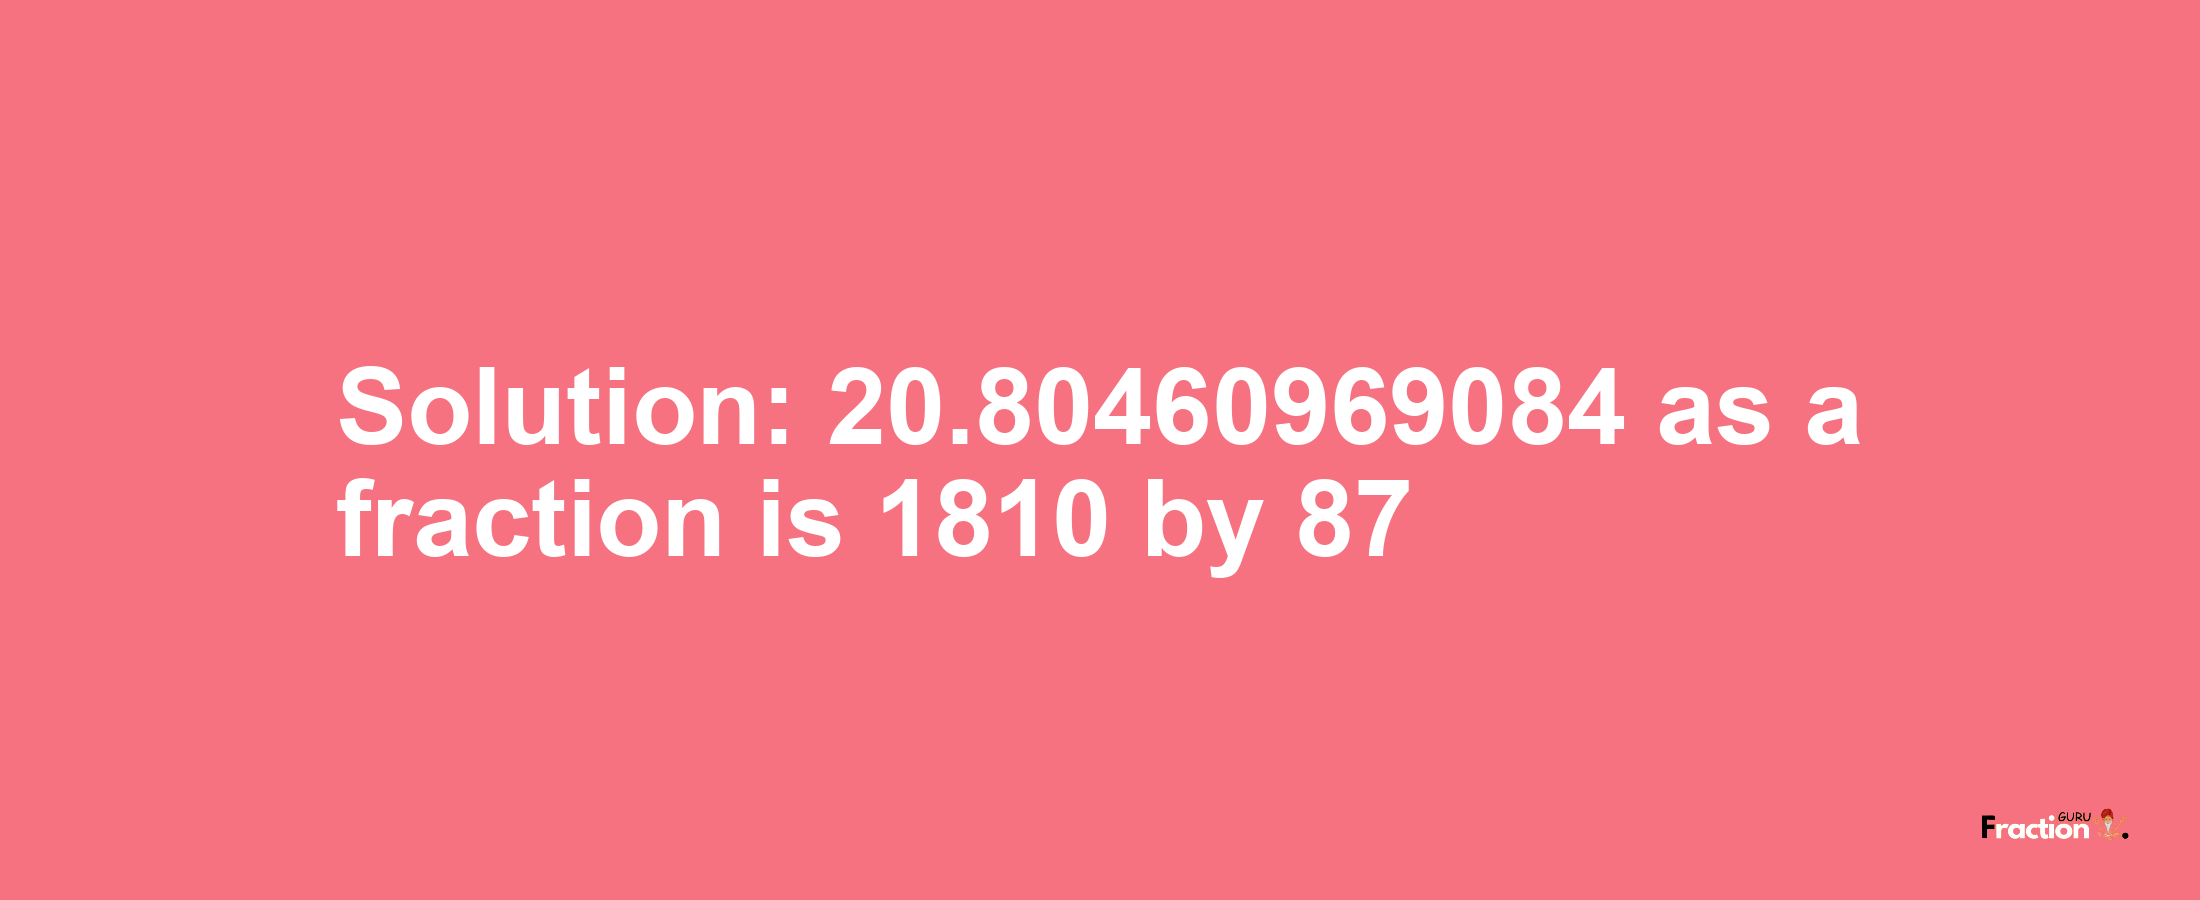 Solution:20.80460969084 as a fraction is 1810/87